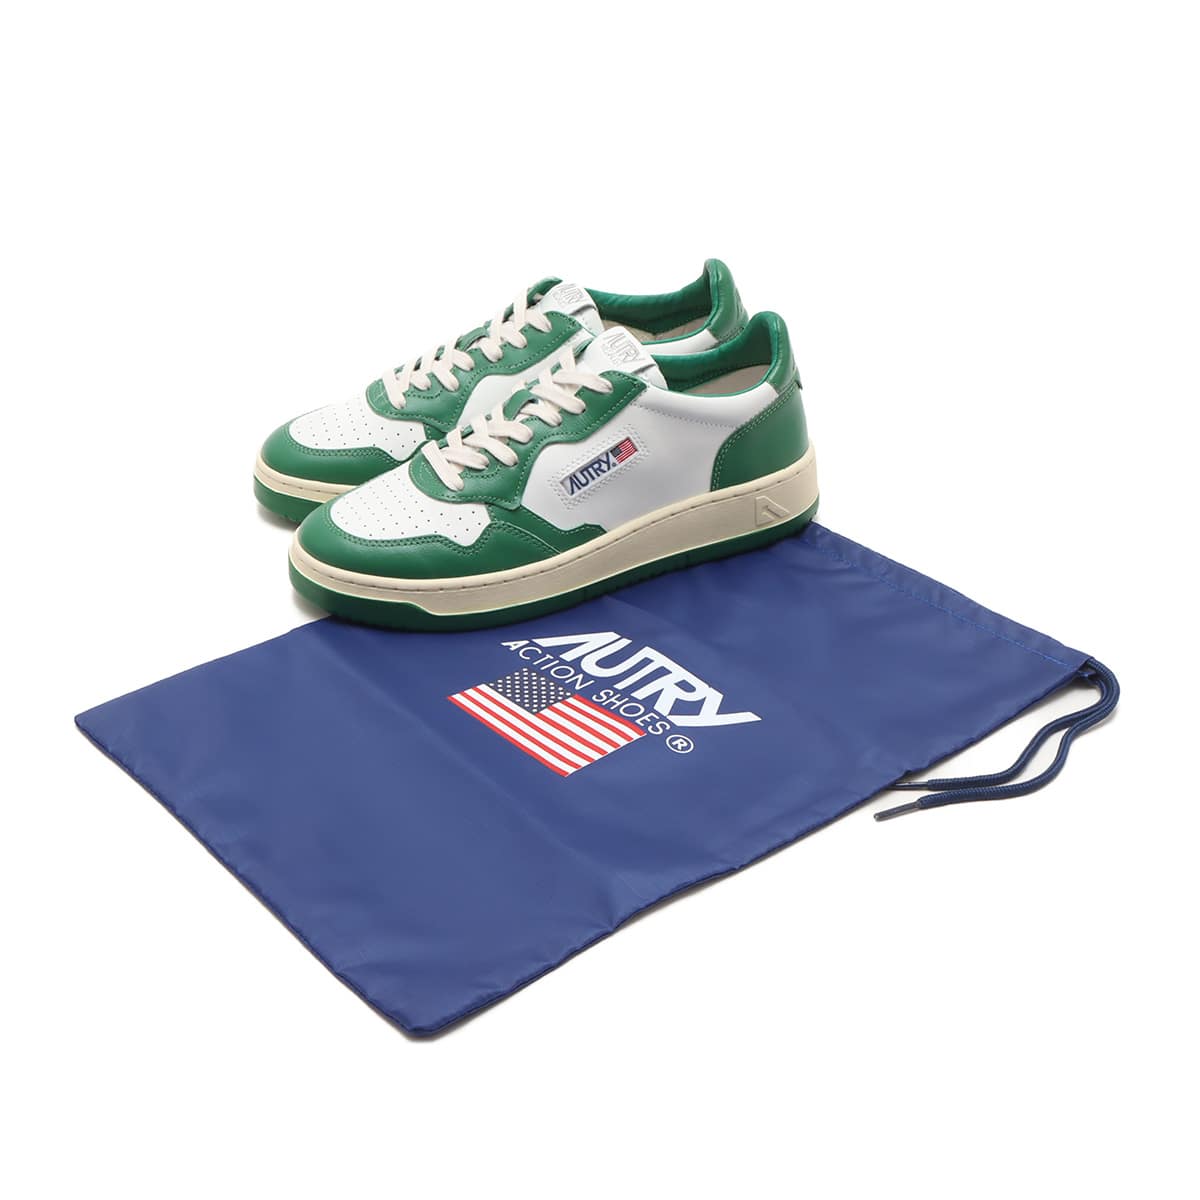 AUTRY MEDALIST LOW MAN LEAT/LEAT WHT/GREEN 23FA-I